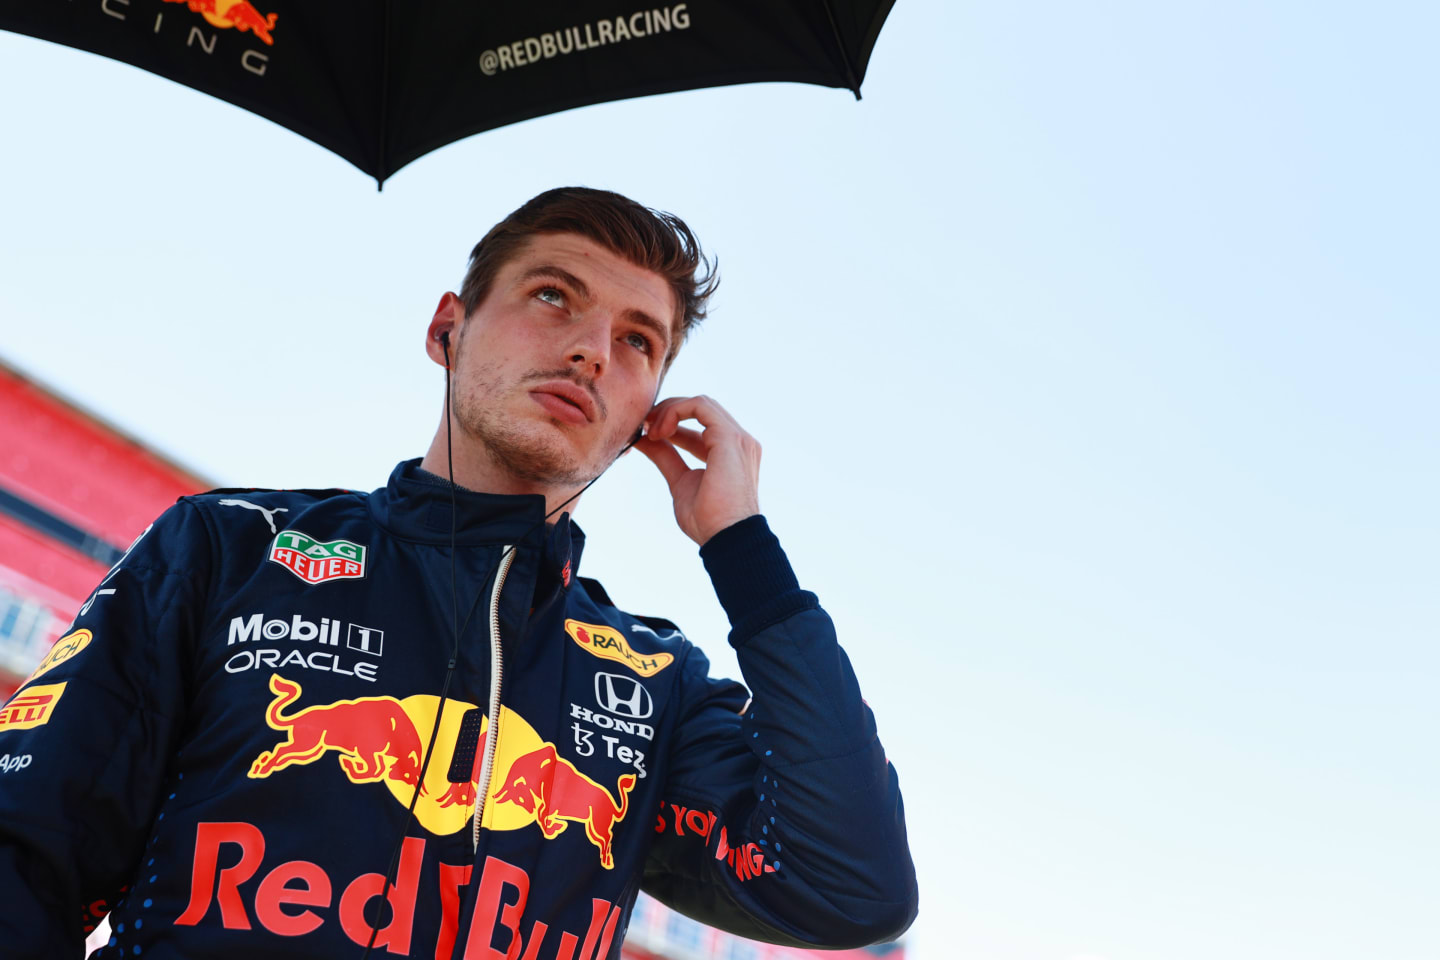 NORTHAMPTON, ENGLAND - JULY 18: Max Verstappen of Netherlands and Red Bull Racing prepares to drive on the grid before the F1 Grand Prix of Great Britain at Silverstone on July 18, 2021 in Northampton, England. (Photo by Mark Thompson/Getty Images)